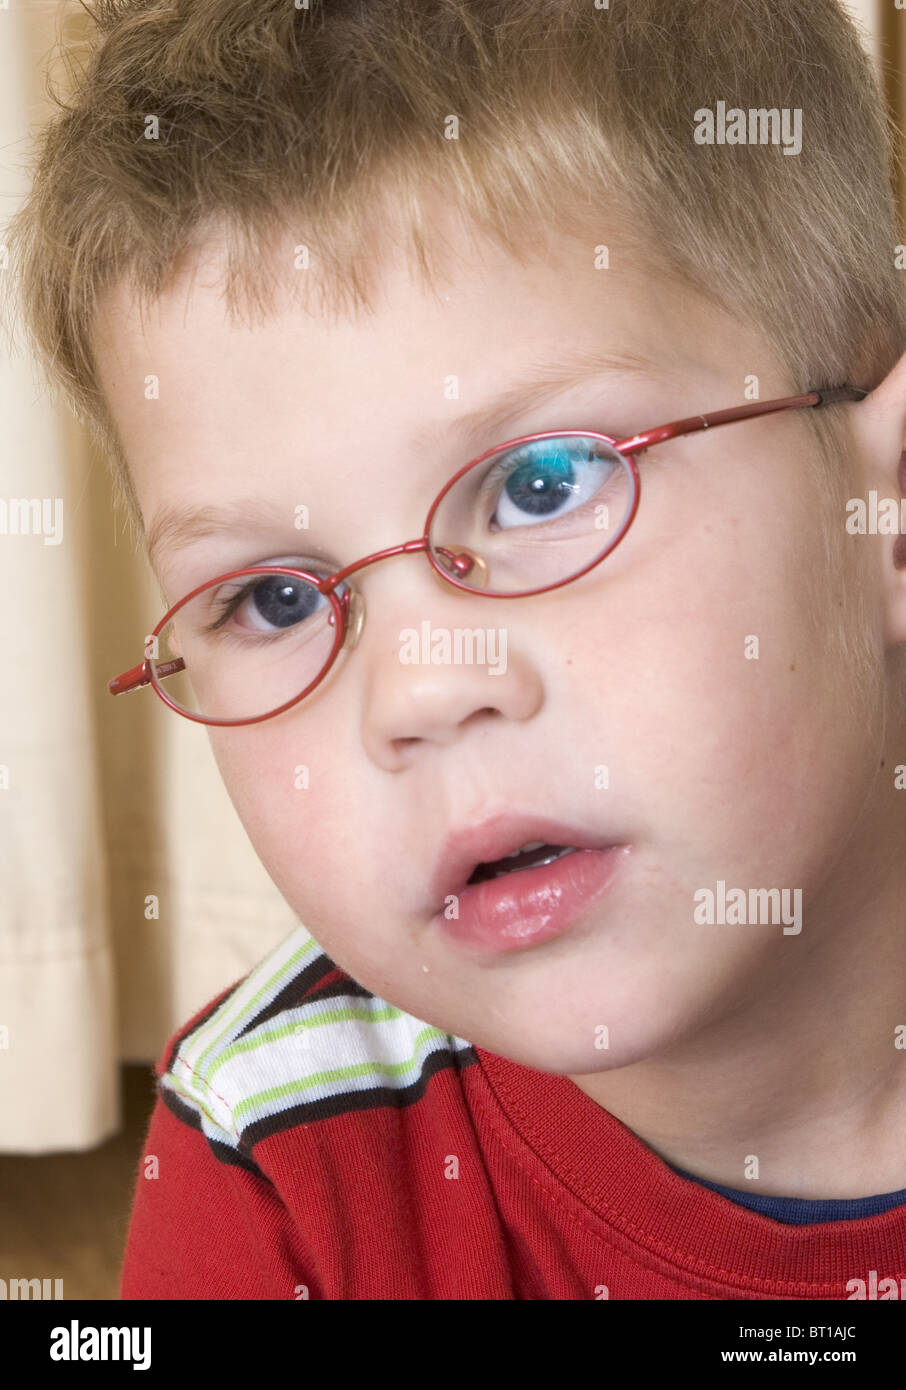 Toddler and eye glasses Stock Photo